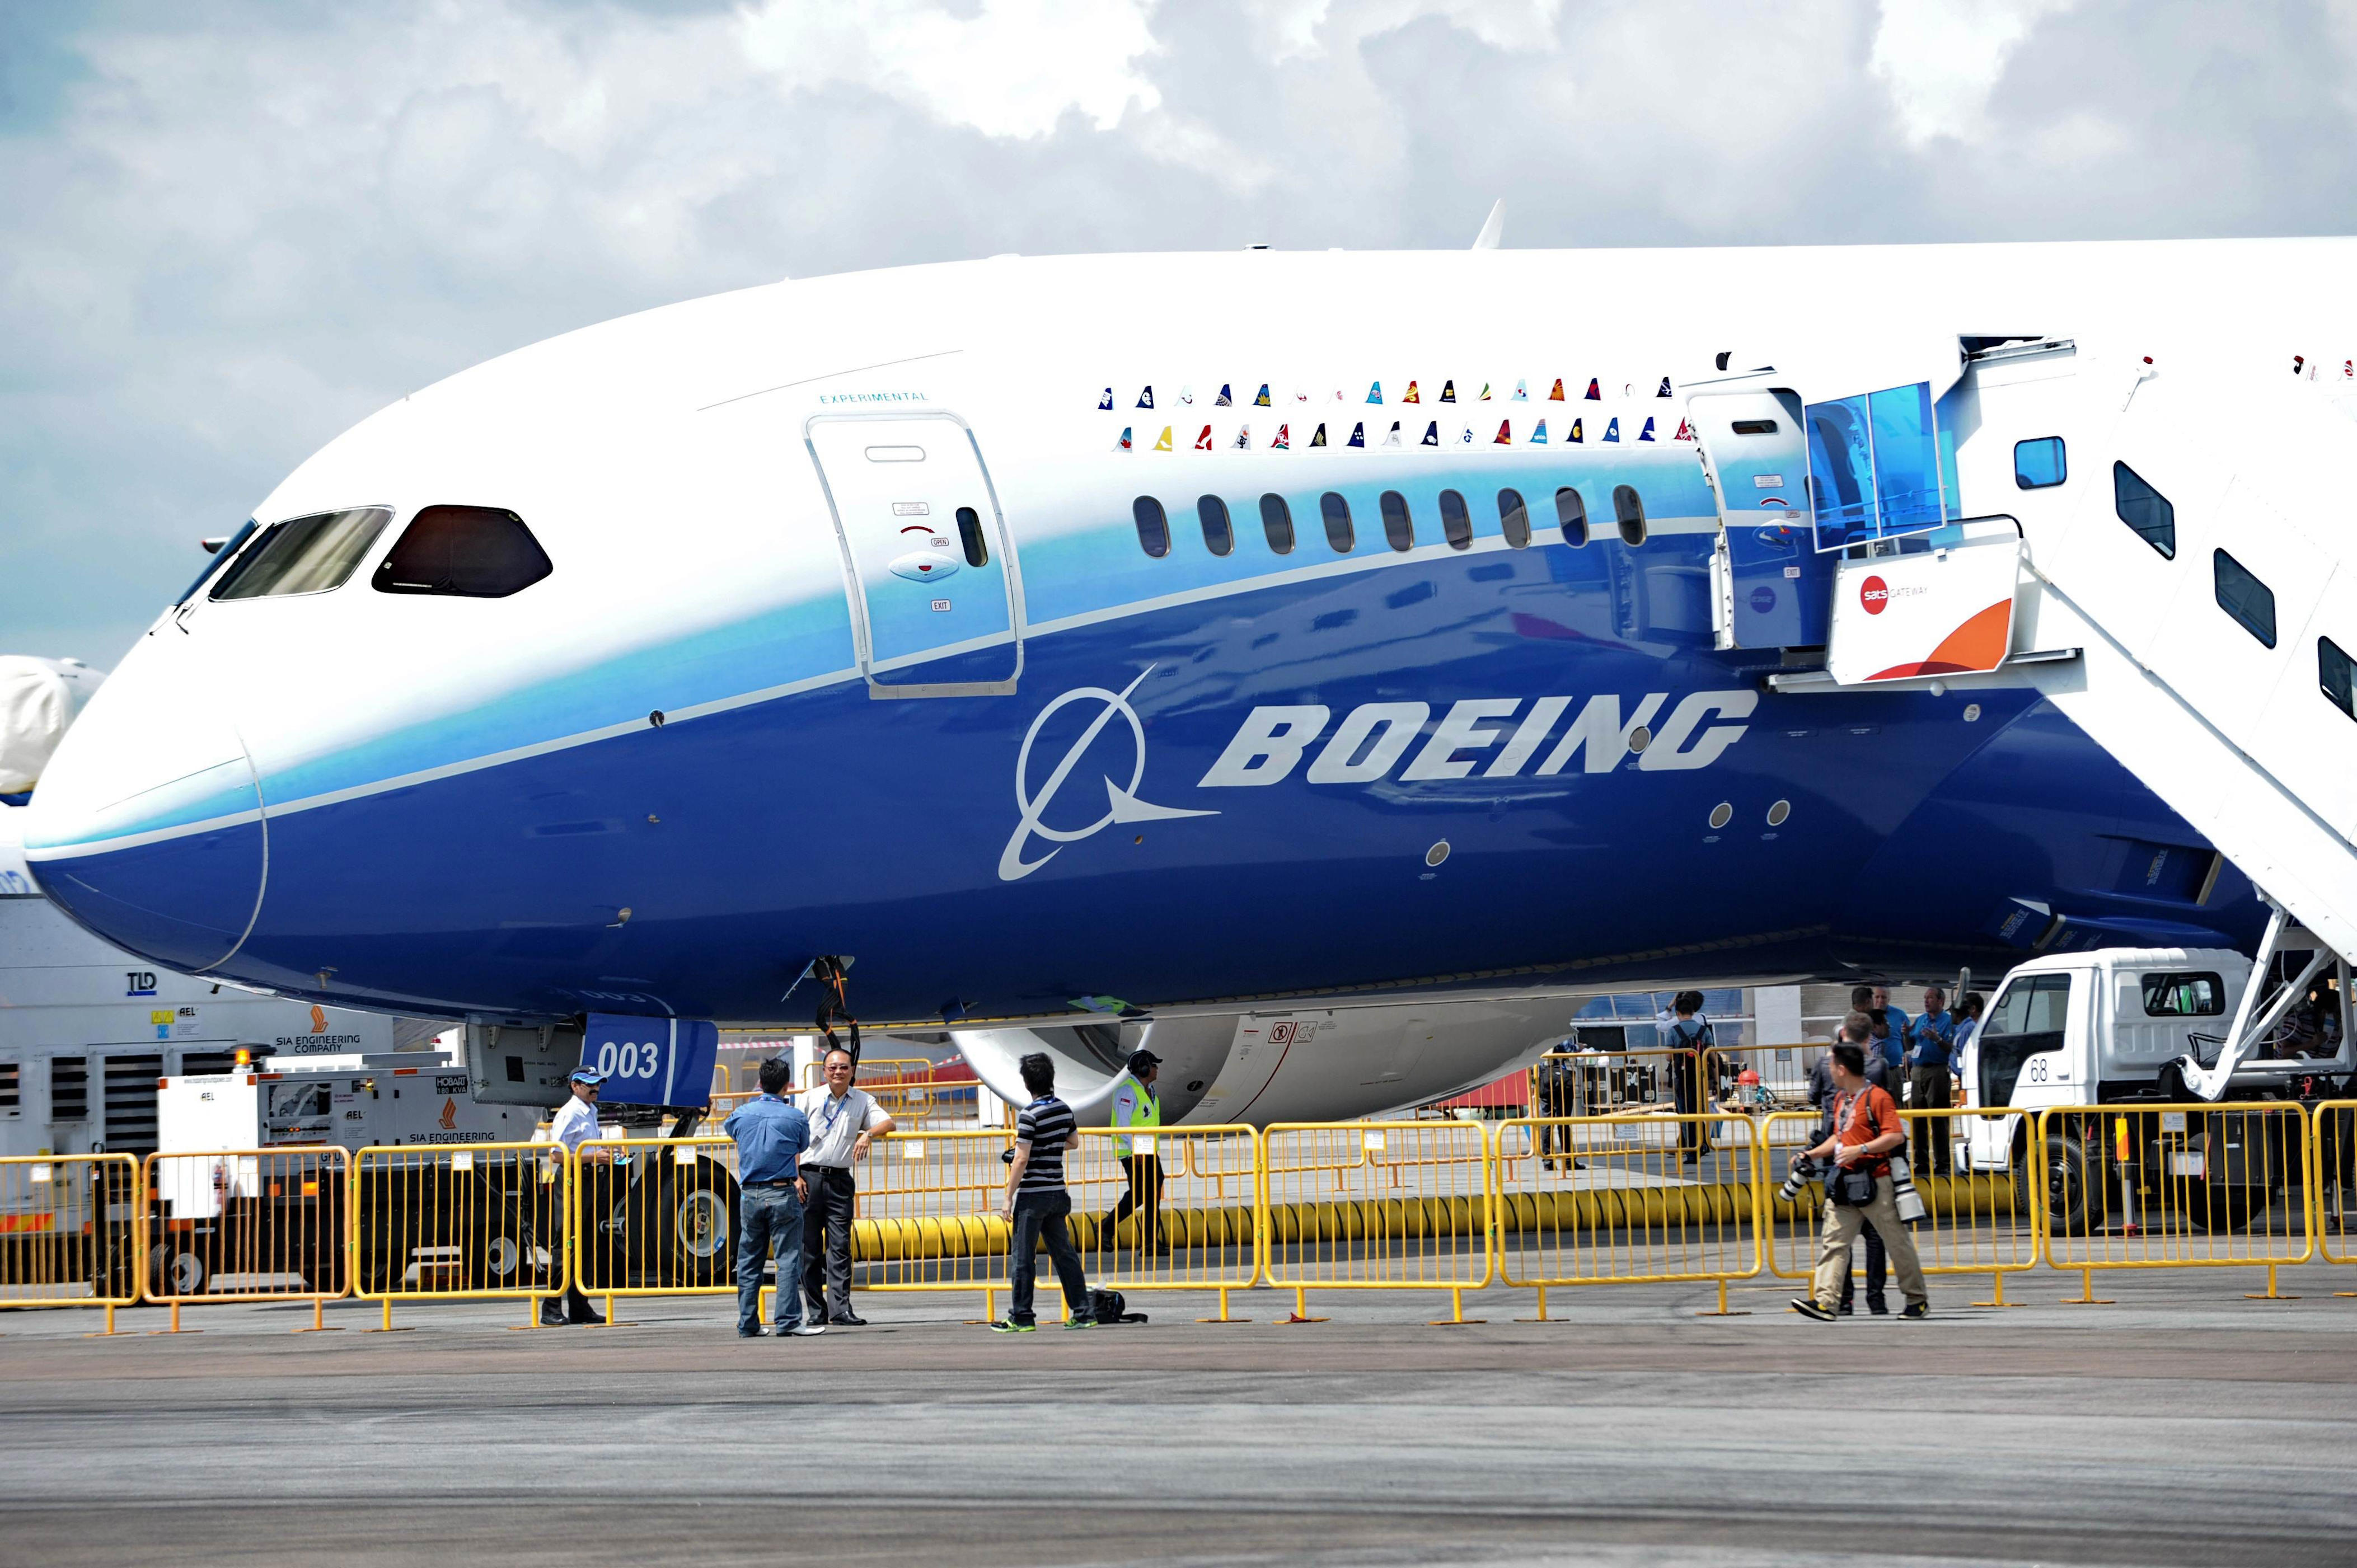 microsoft, a boeing engineer turned whistleblower says the planemaker needs ground all its 787 dreamliners